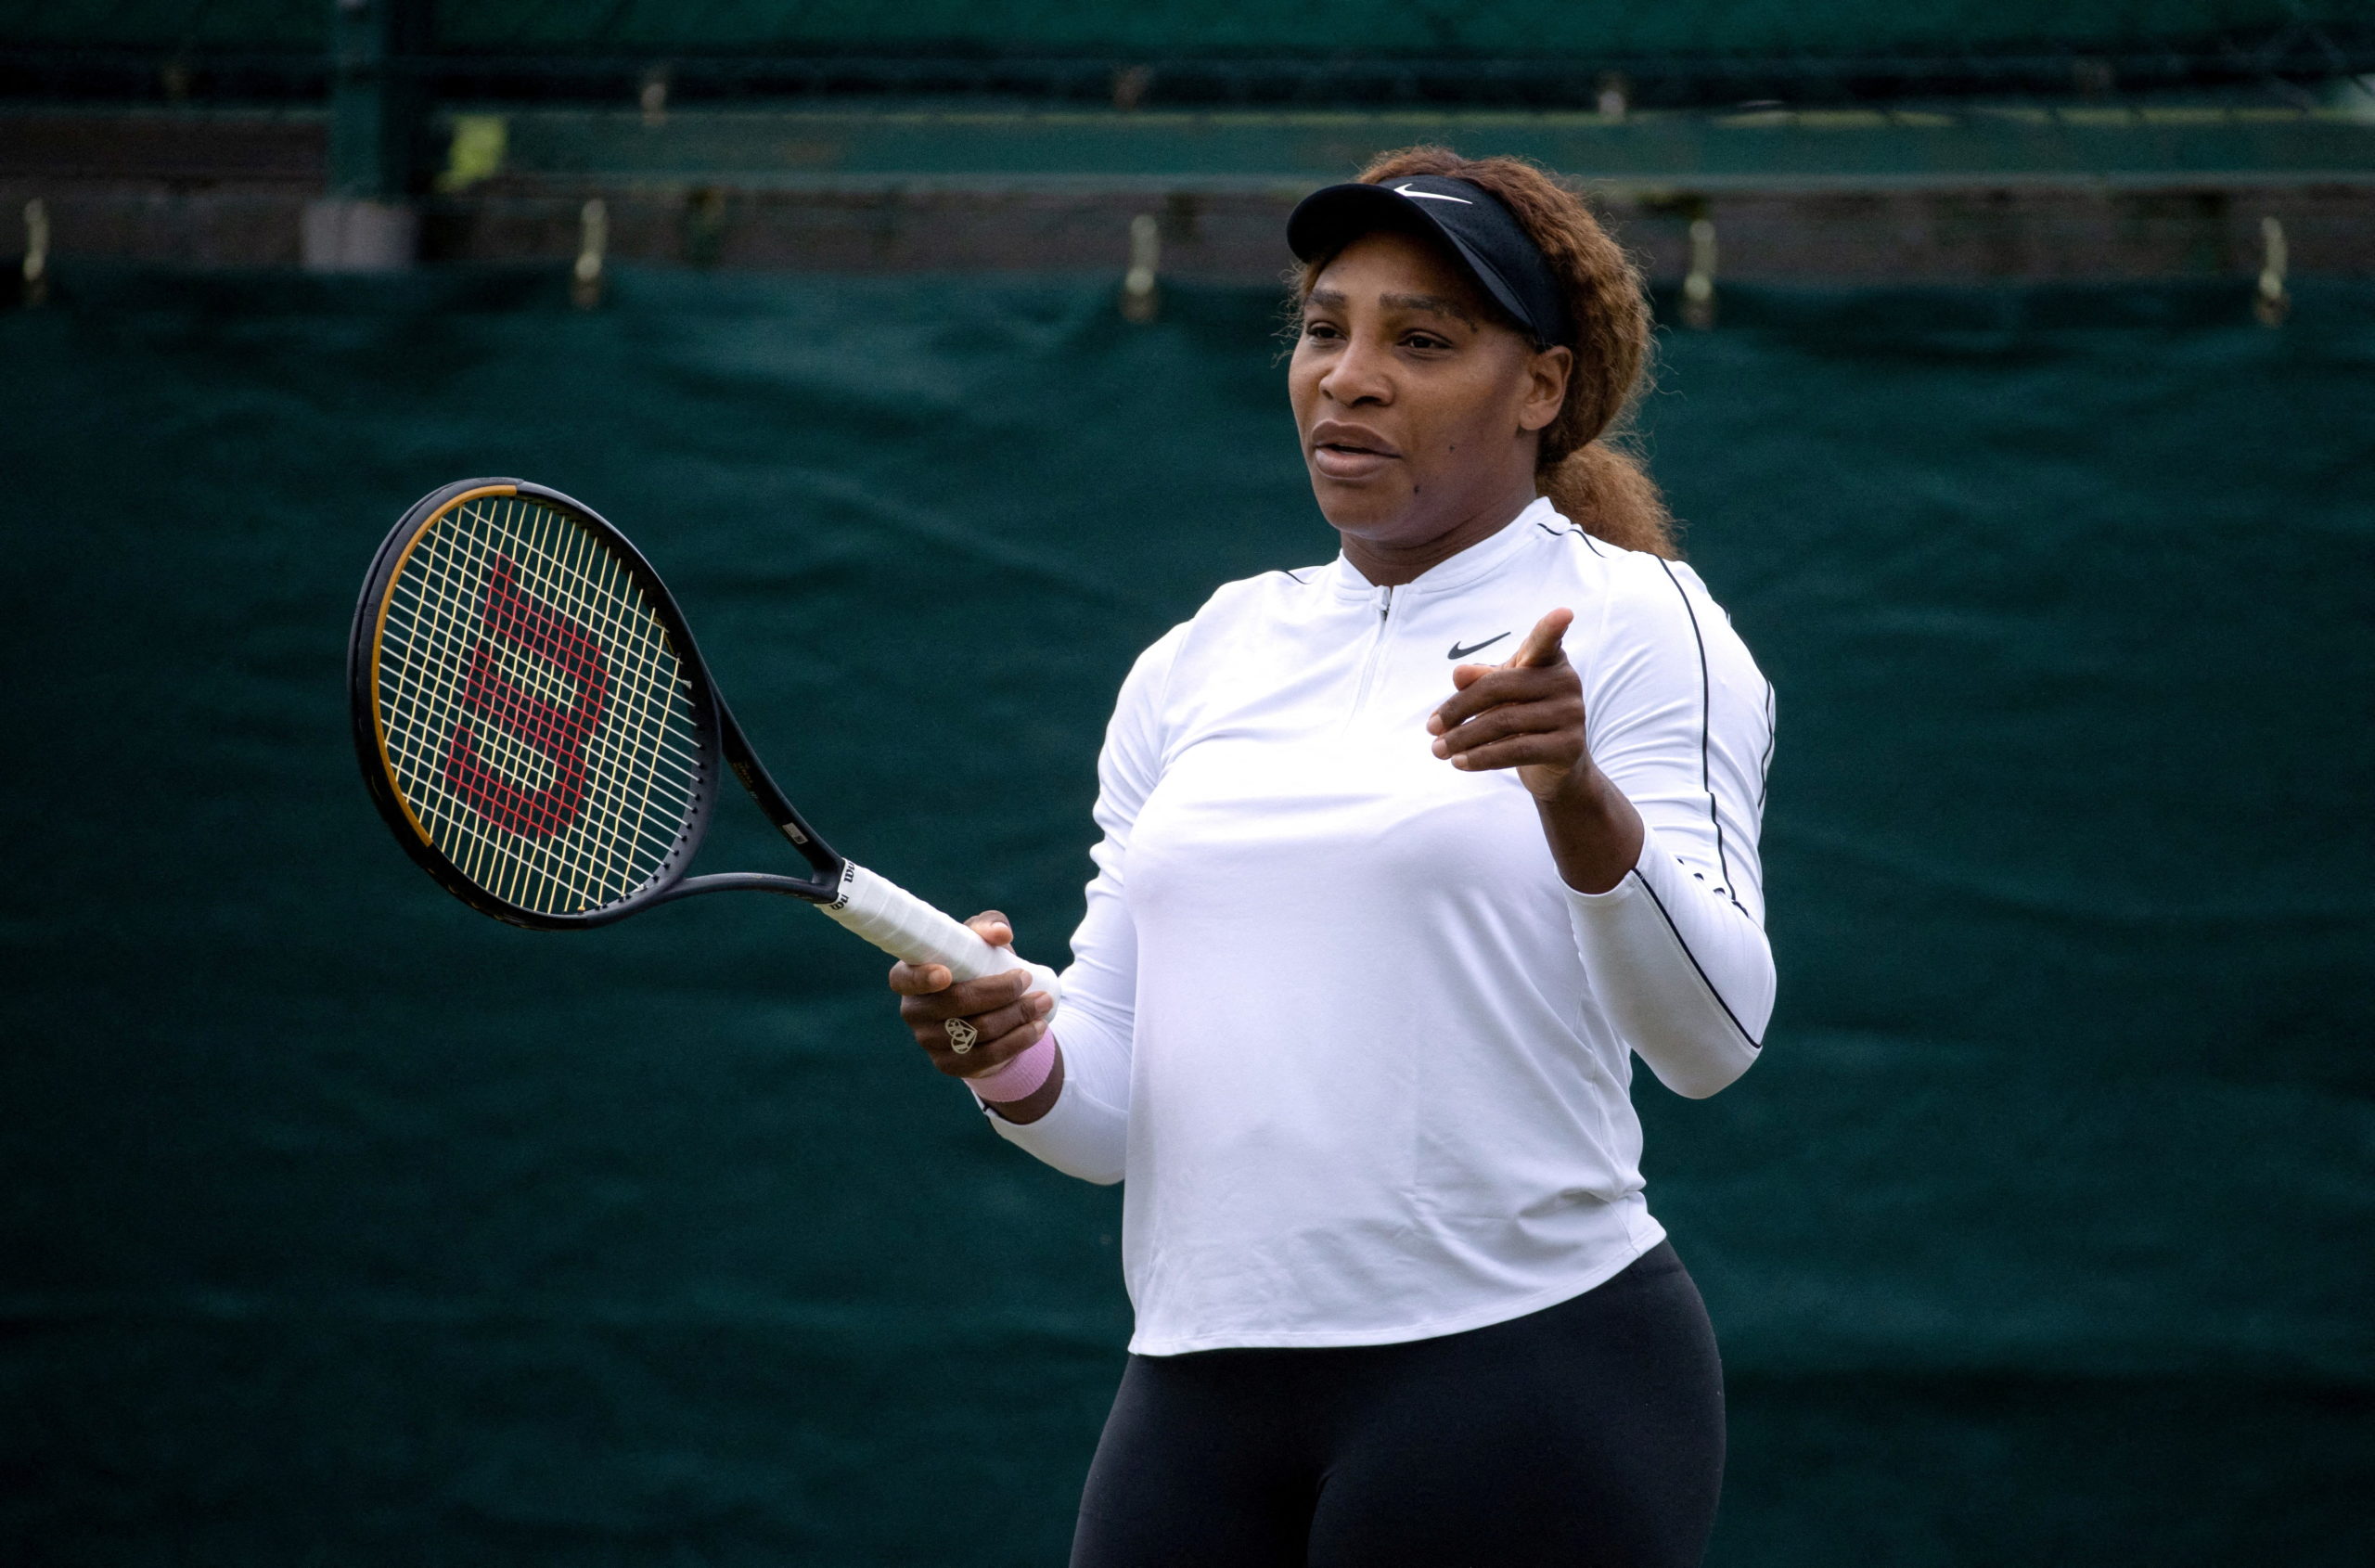 FILE PHOTO: Tennis - Wimbledon - All England Lawn Tennis and Croquet Club, London, Britain - June 28, 2021 Serena Williams of the U.S. during a practice session 